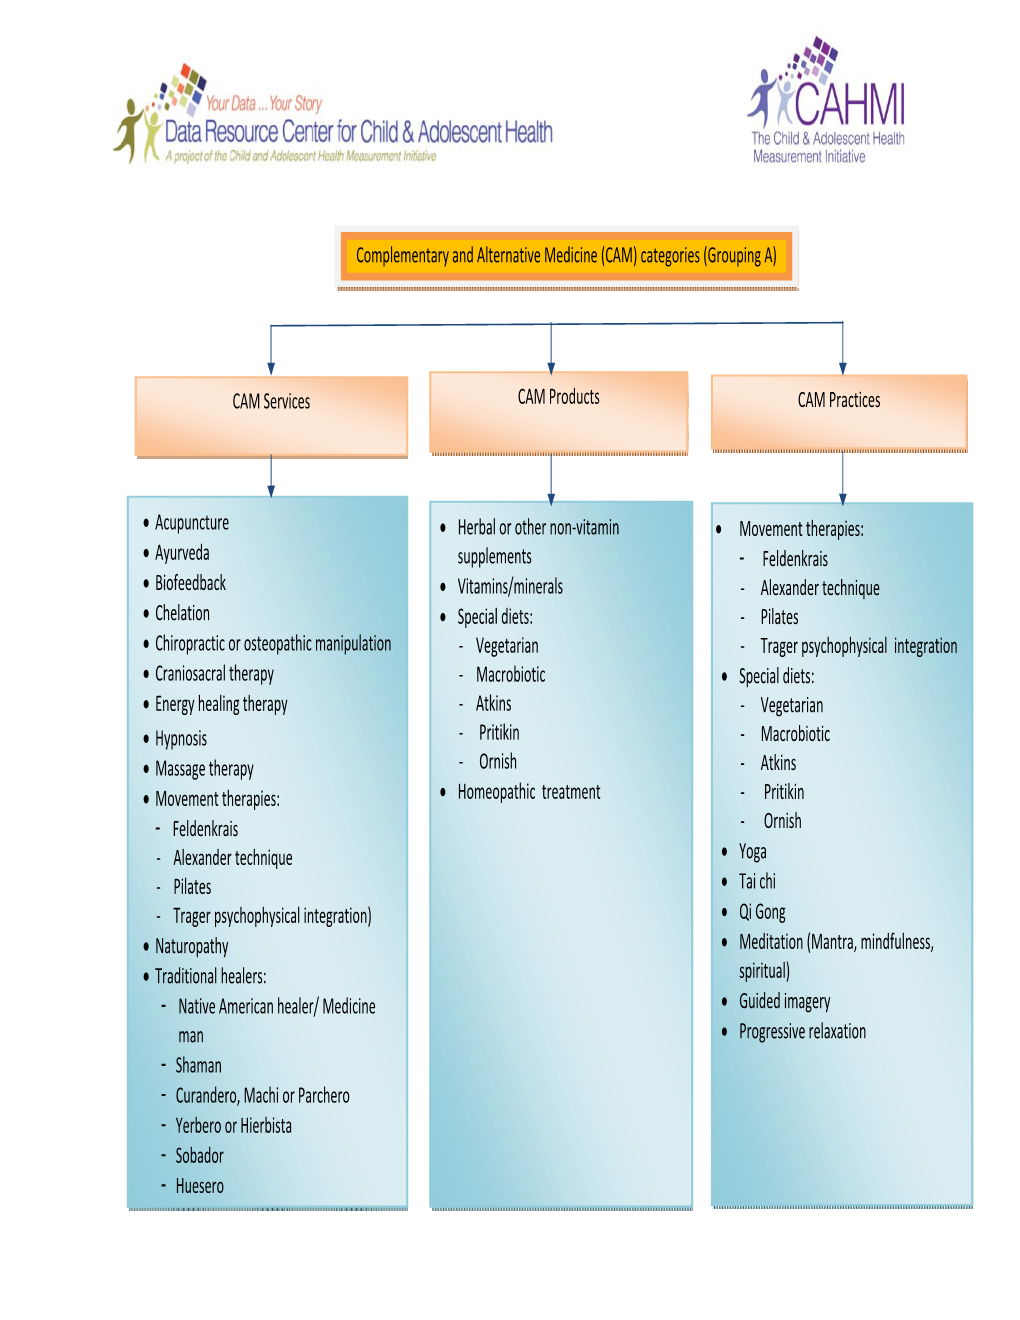 Complementary and Alternative Medicine (CAM) Categories (Grouping A)